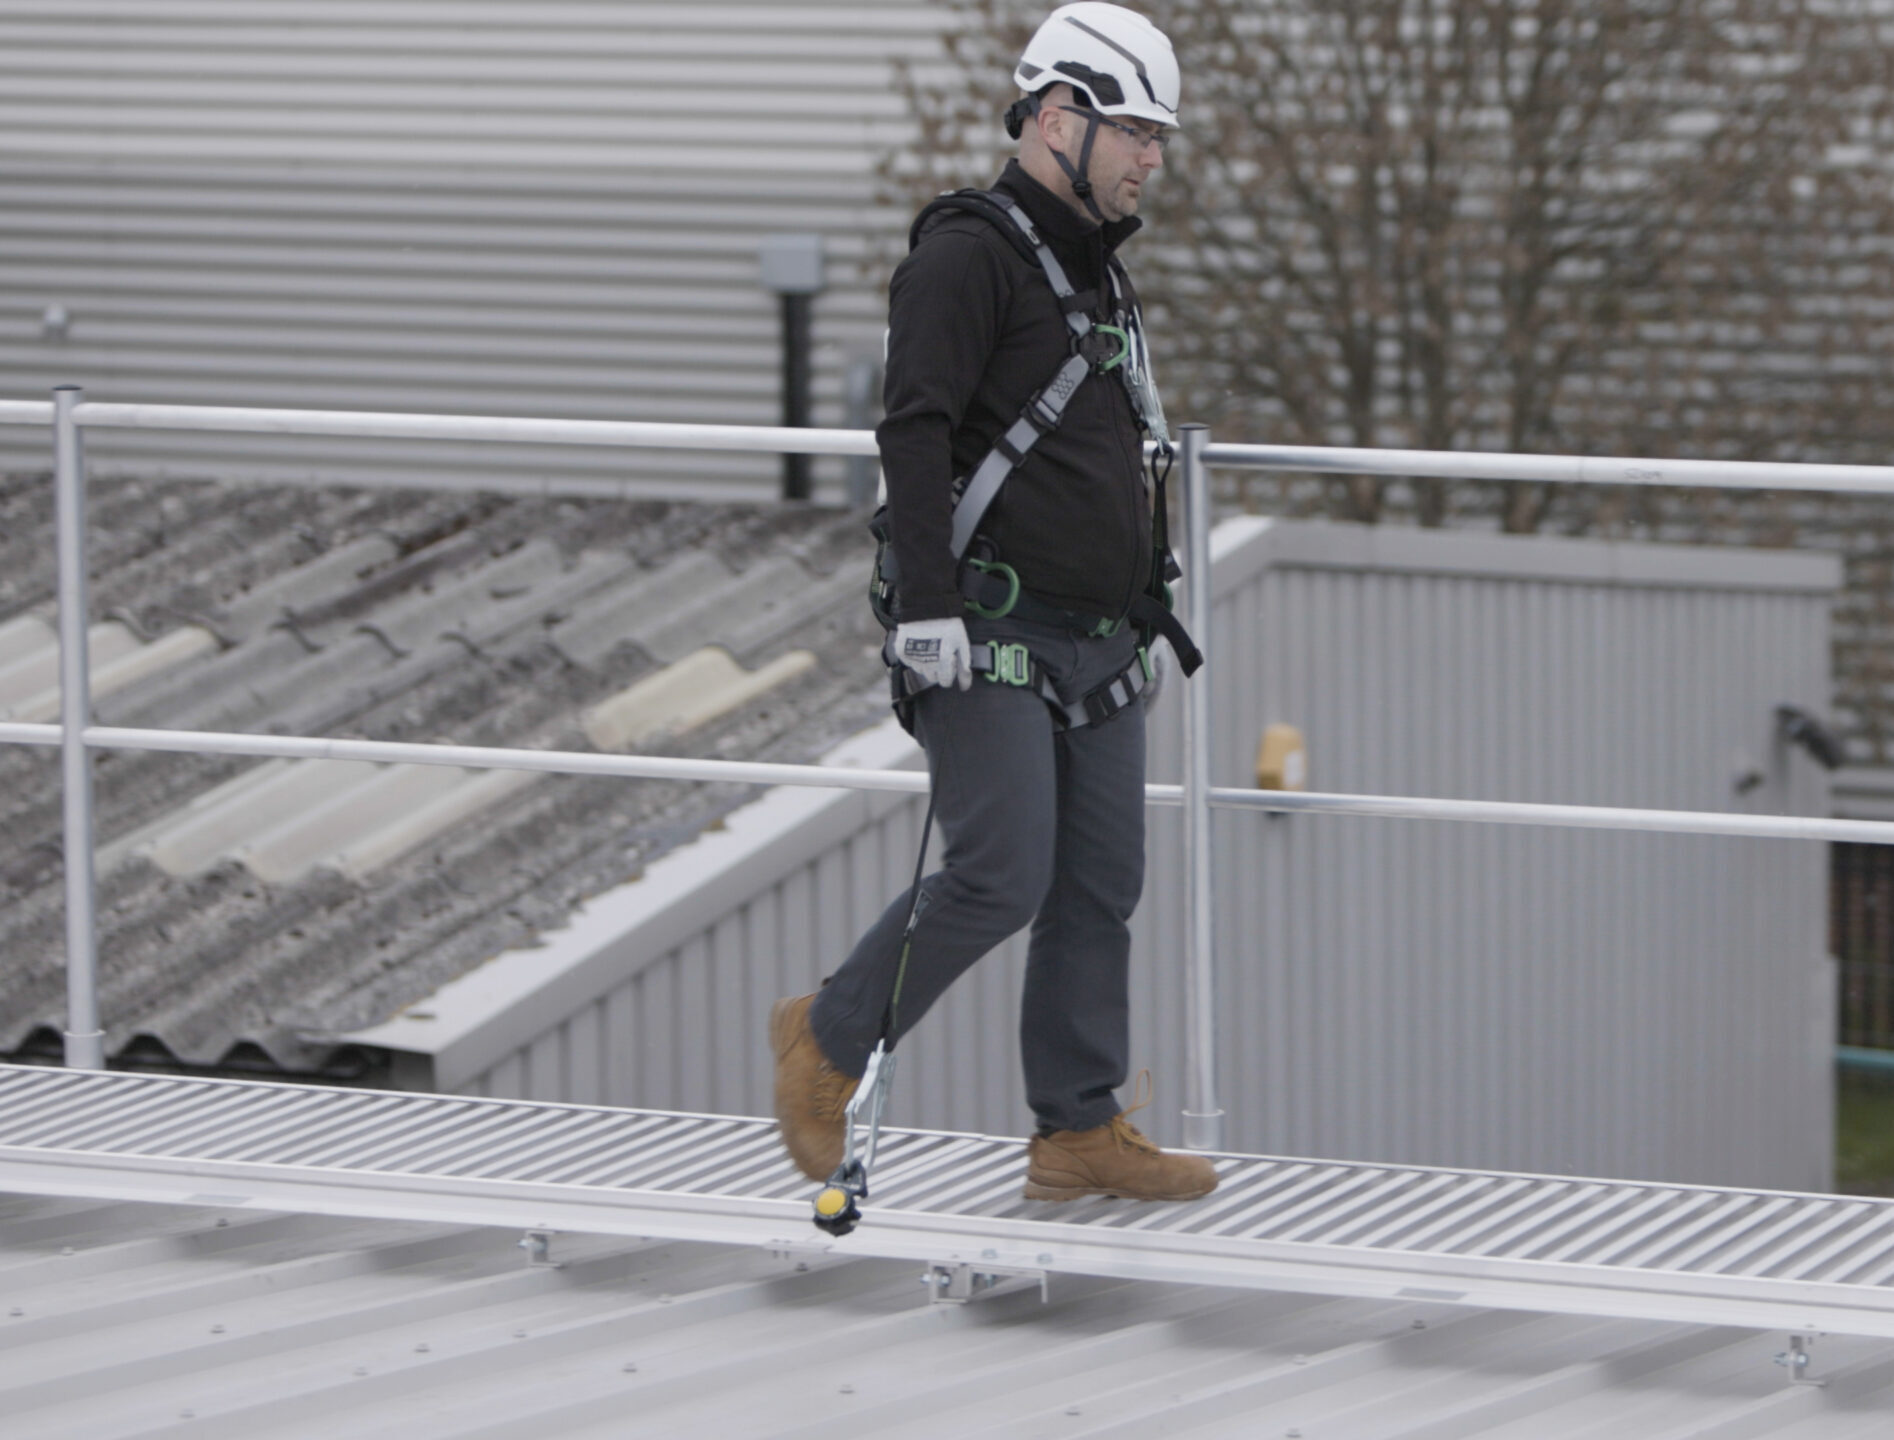 Personal Fall Protection Systems and PPE training course